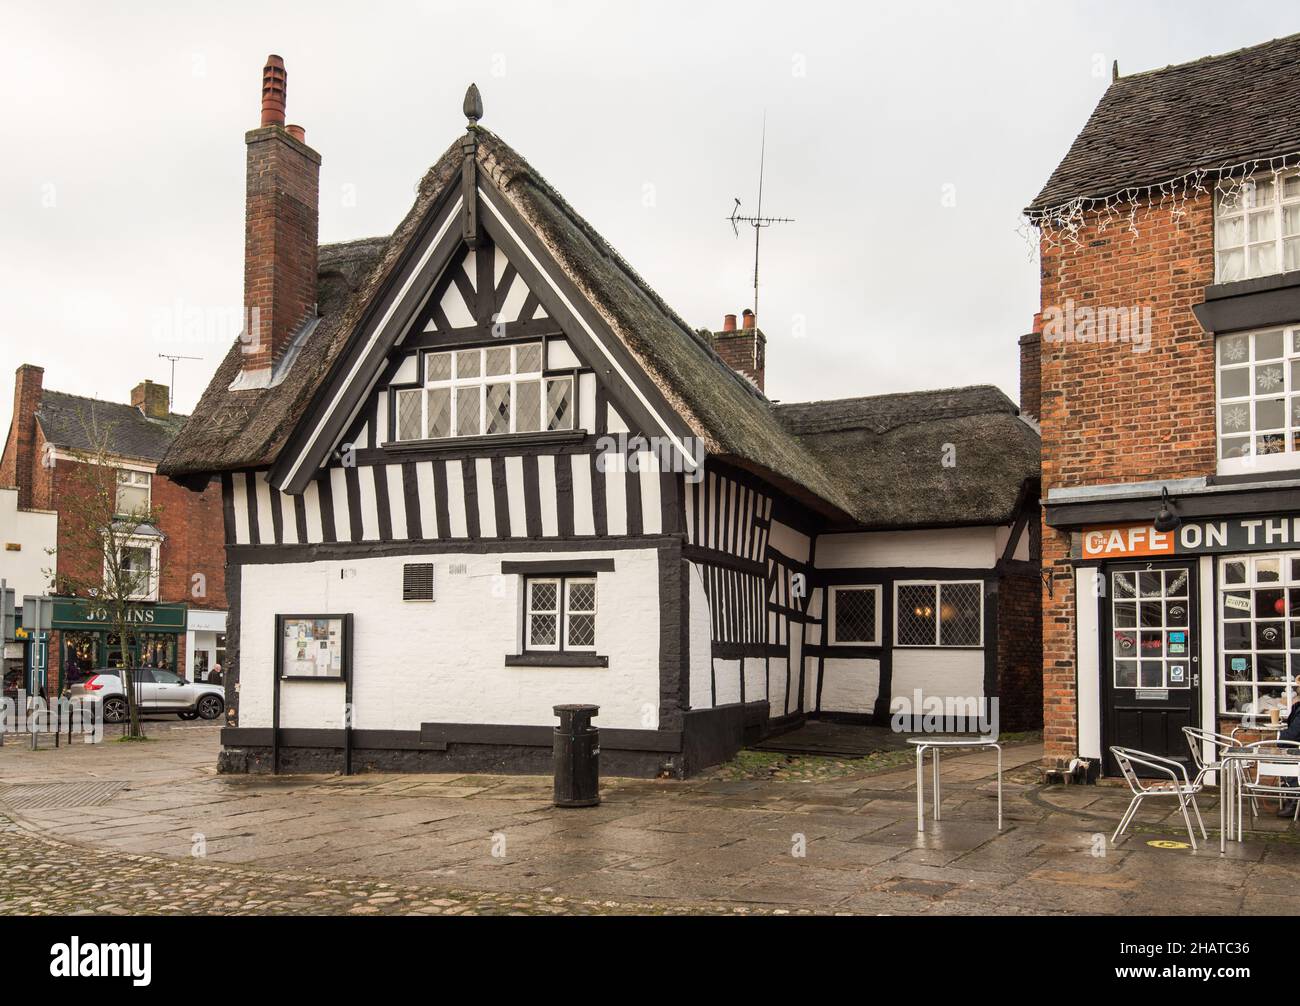 Thatched pub in the market town of Sandbach England adjacent to The 'Cafe on the Square', ( latter is 2 Market Square, Sandbach, Cheshire) Stock Photo